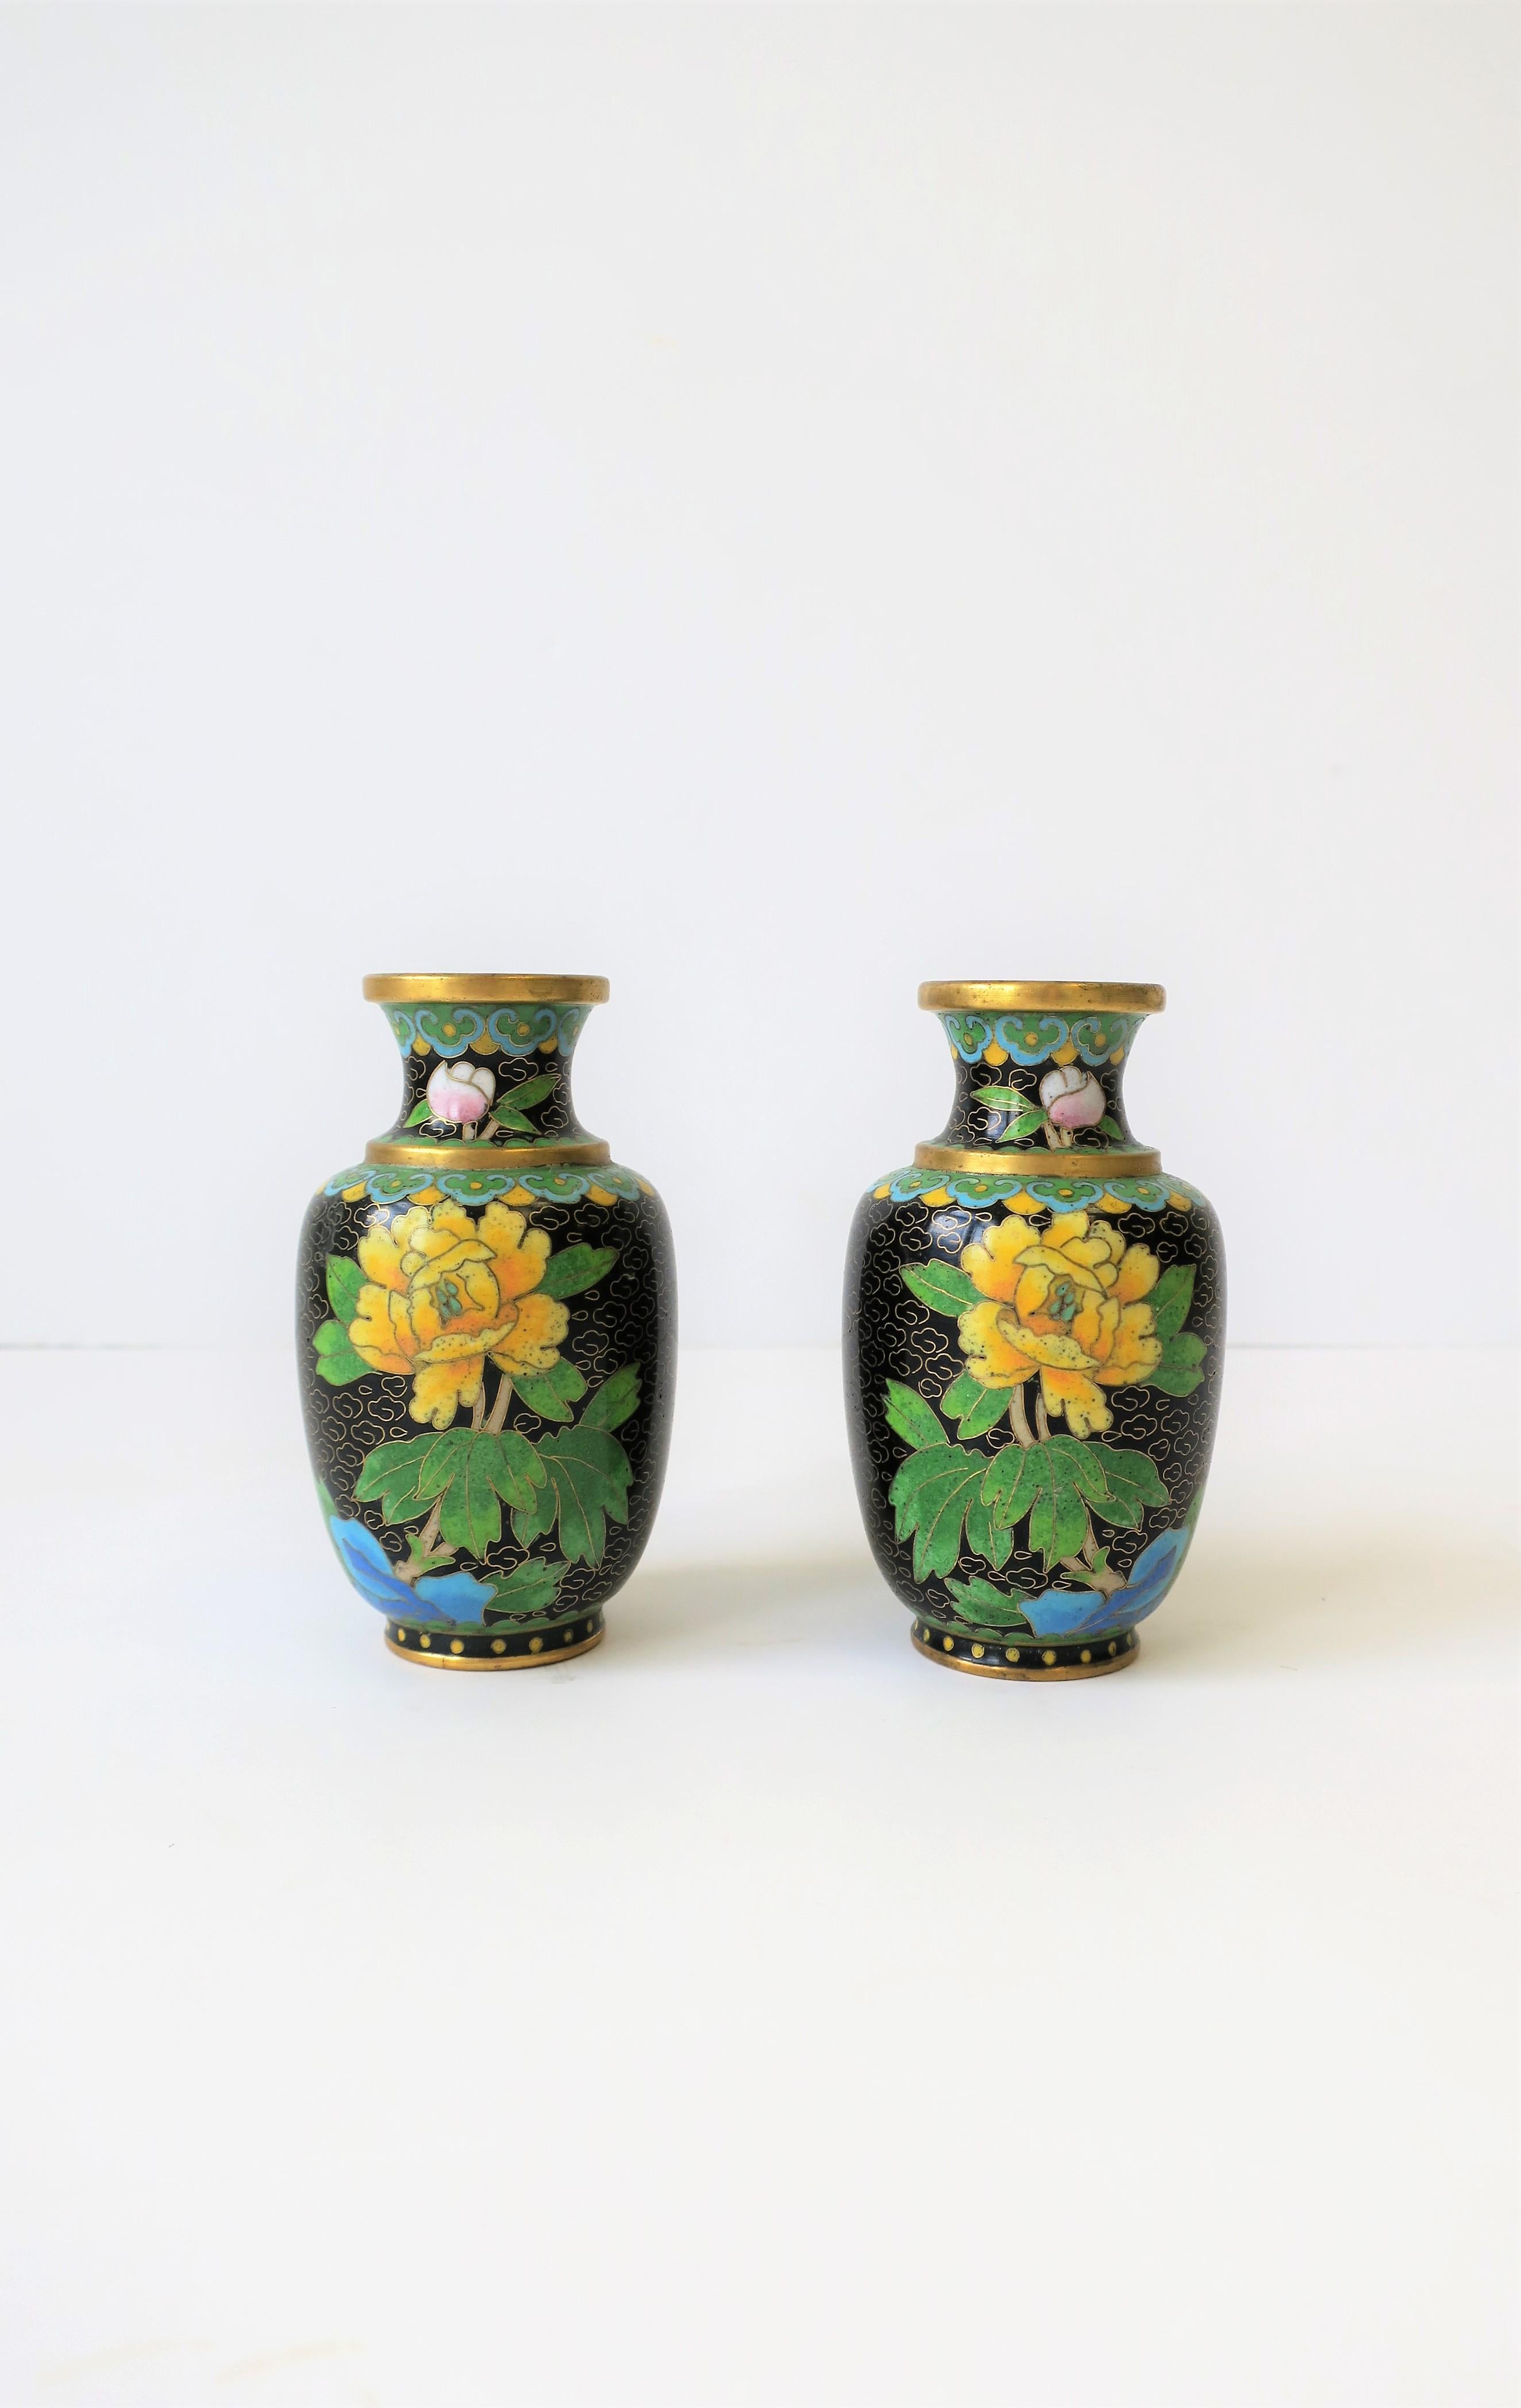 A beautiful pair of vintage yellow, black and green Asian Cloisonné enamel and brass vases, circa early to mid- 20th century, China. Vases have a yellow enamel flower and green leaf design with a black background. Other colors include white, blue,